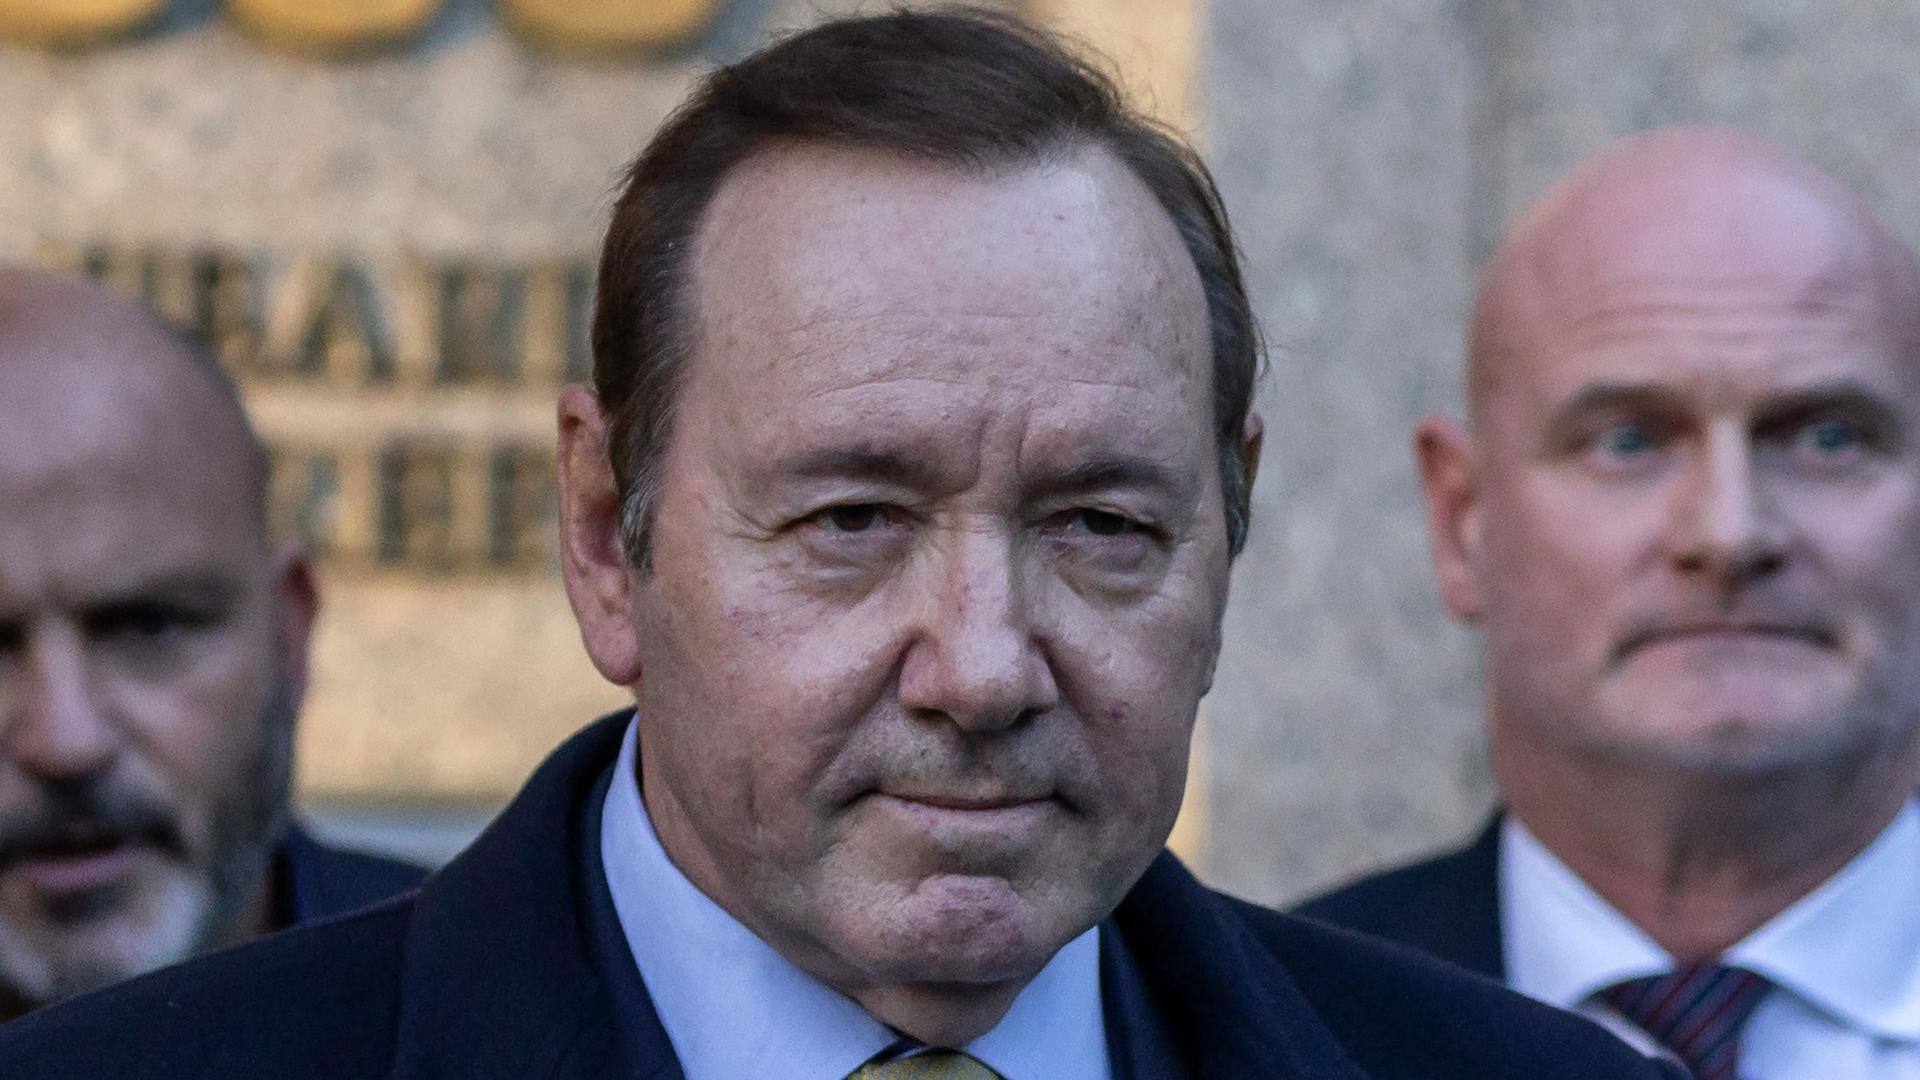 'Producers waiting to sign me': Kevin Spacey ahead of trial